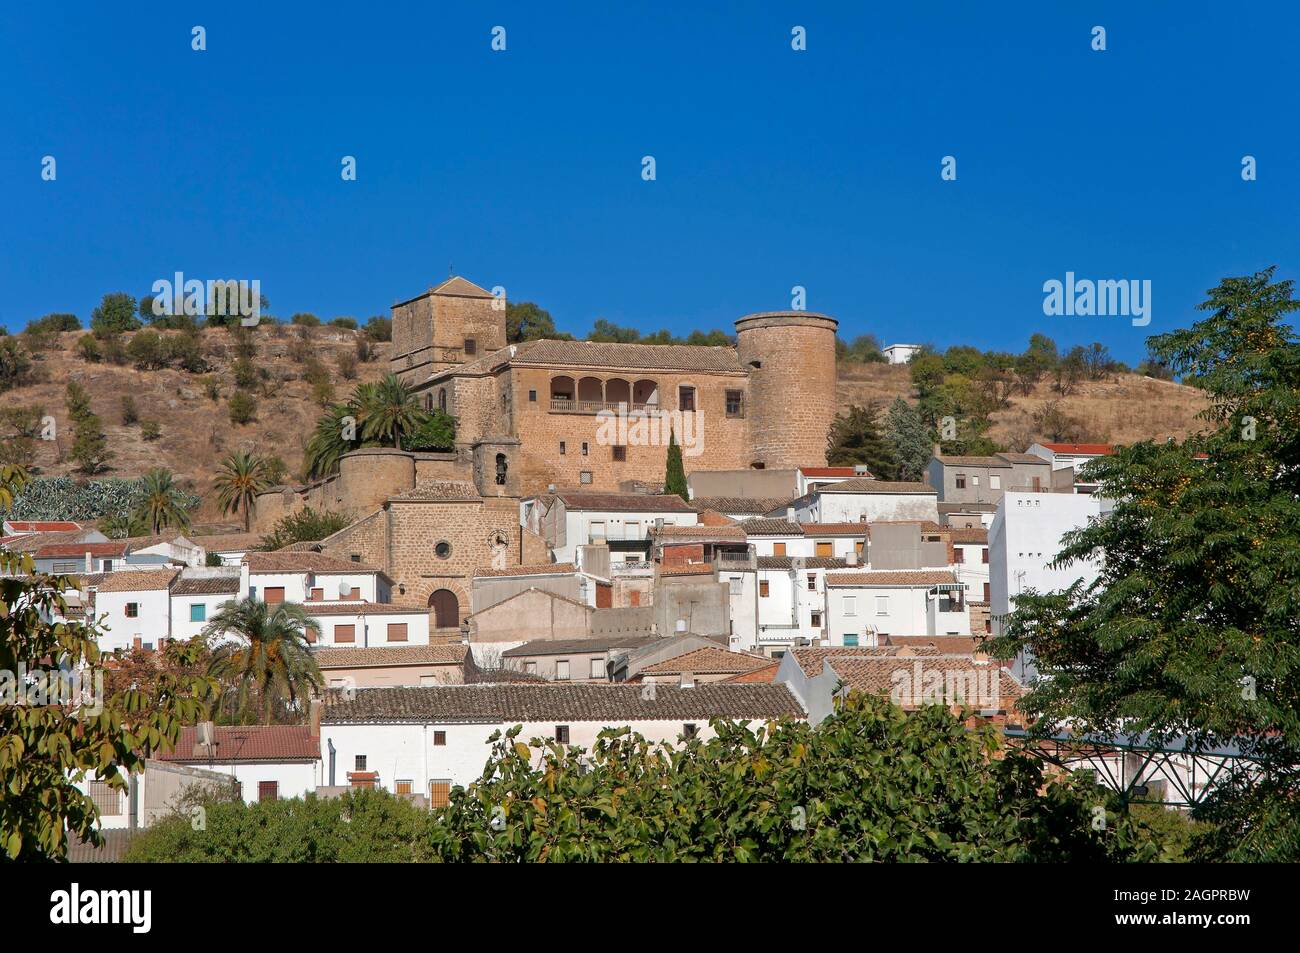 Castle and town, Canena, Jaen province, Region of Andalusia, Spain, Europe. Stock Photo